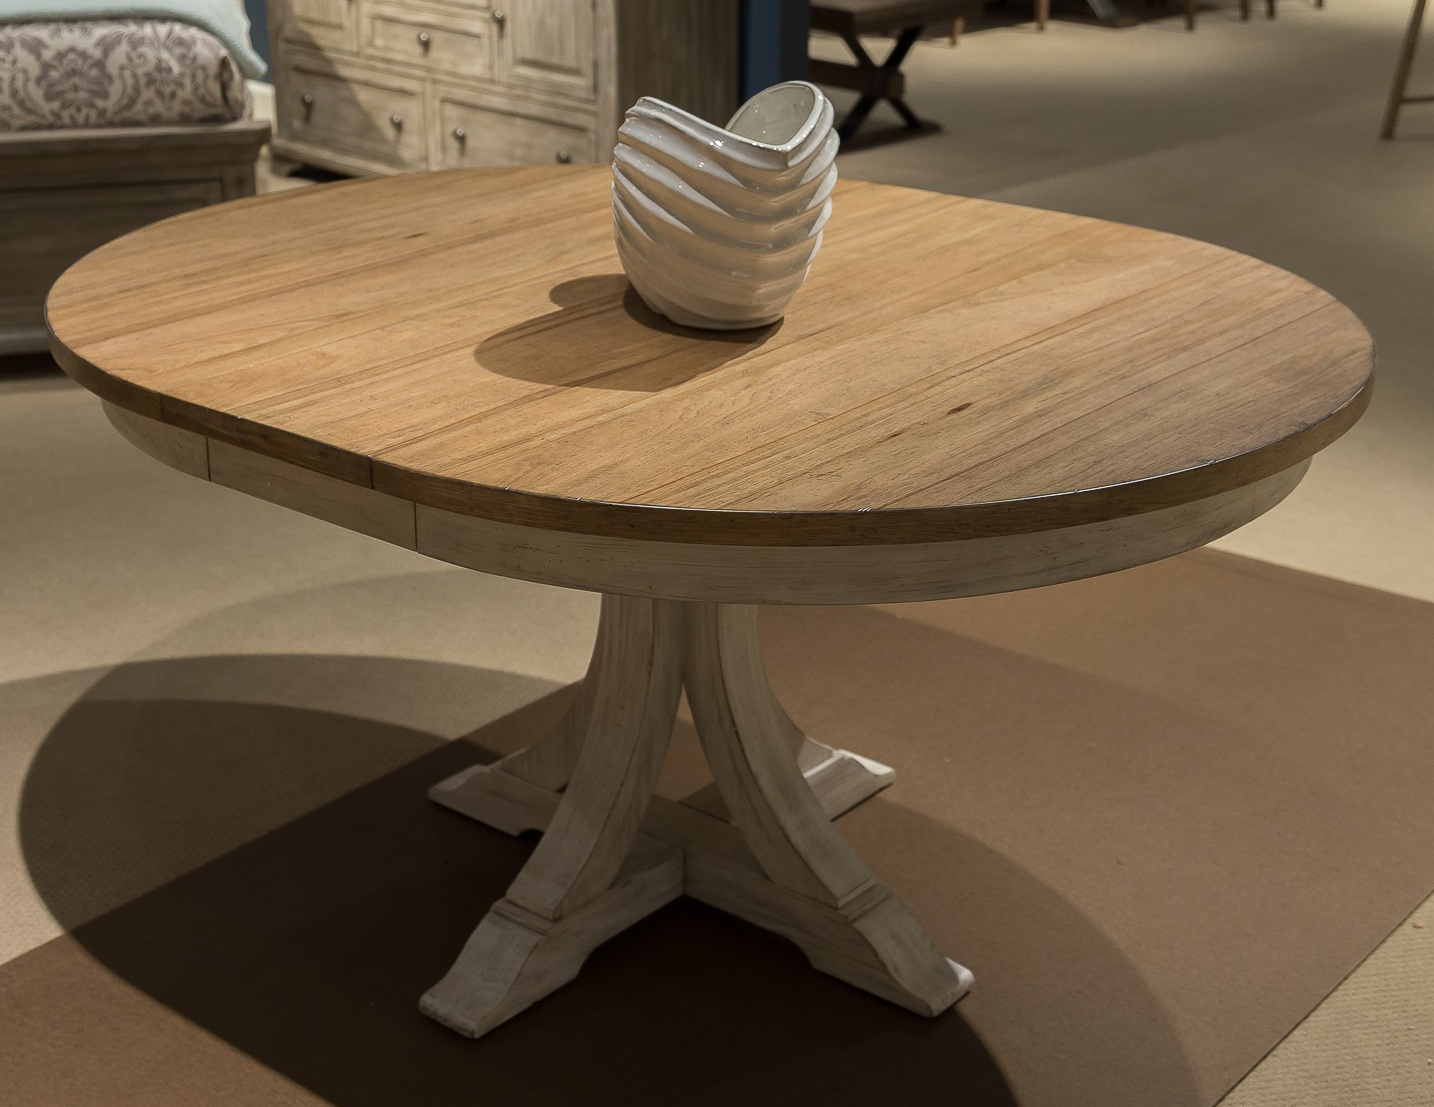 Homestead Table Pic 2 ( Heading Oval Pedestal Table)